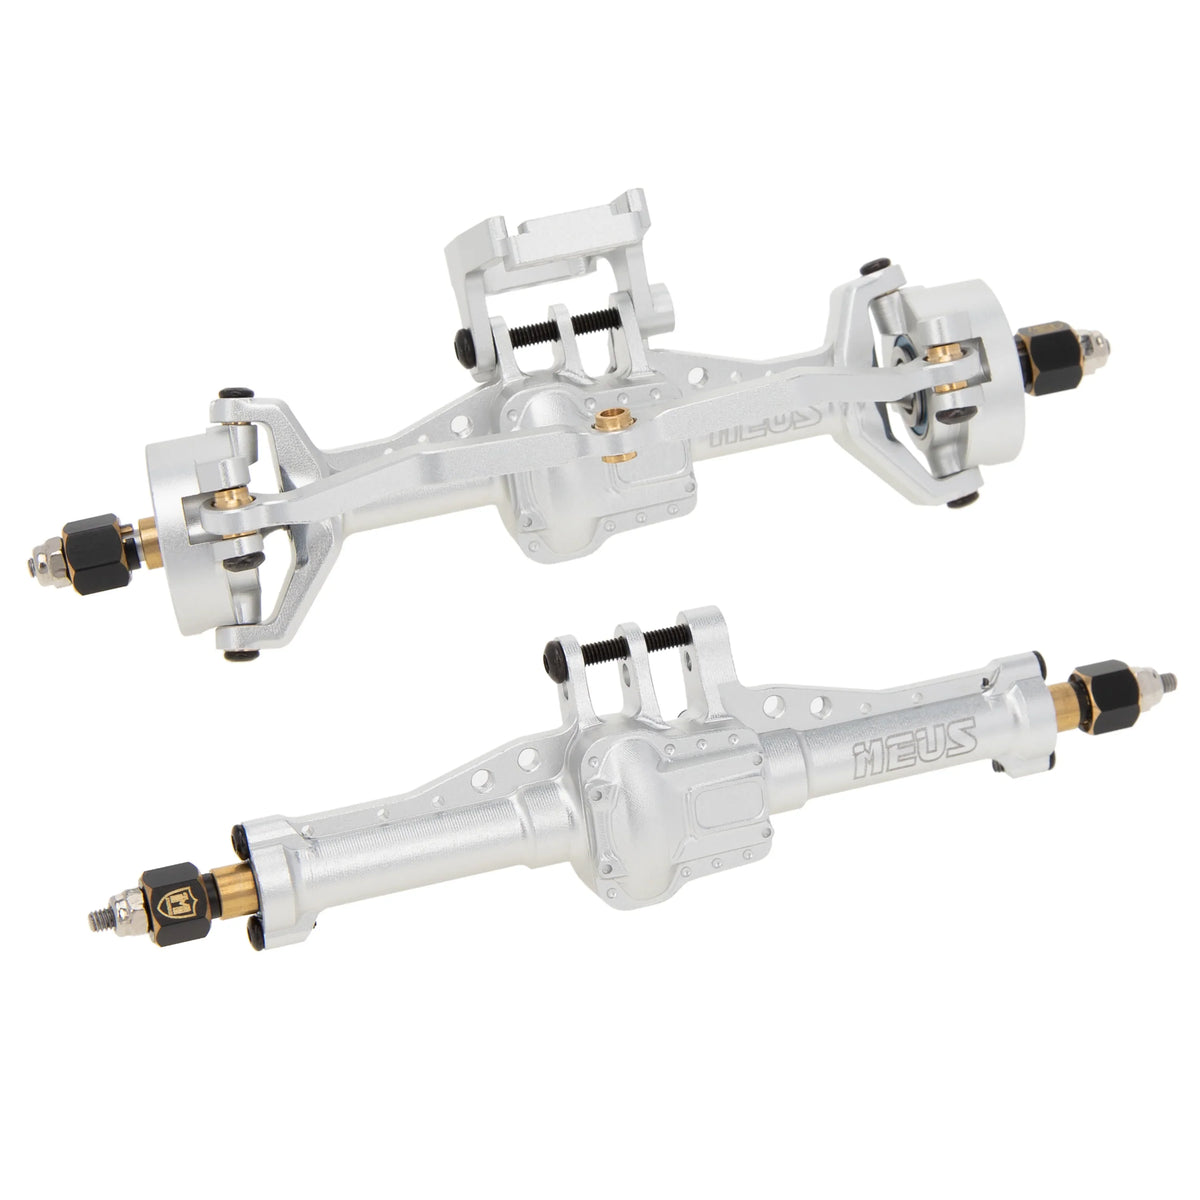 MEUS RACING Aluminum CNC Upgraded Front and Rear Axle Assembly Kit TRX4M Axle for 1/18 TRX4M Upgrade (Silver) - HeliDirect